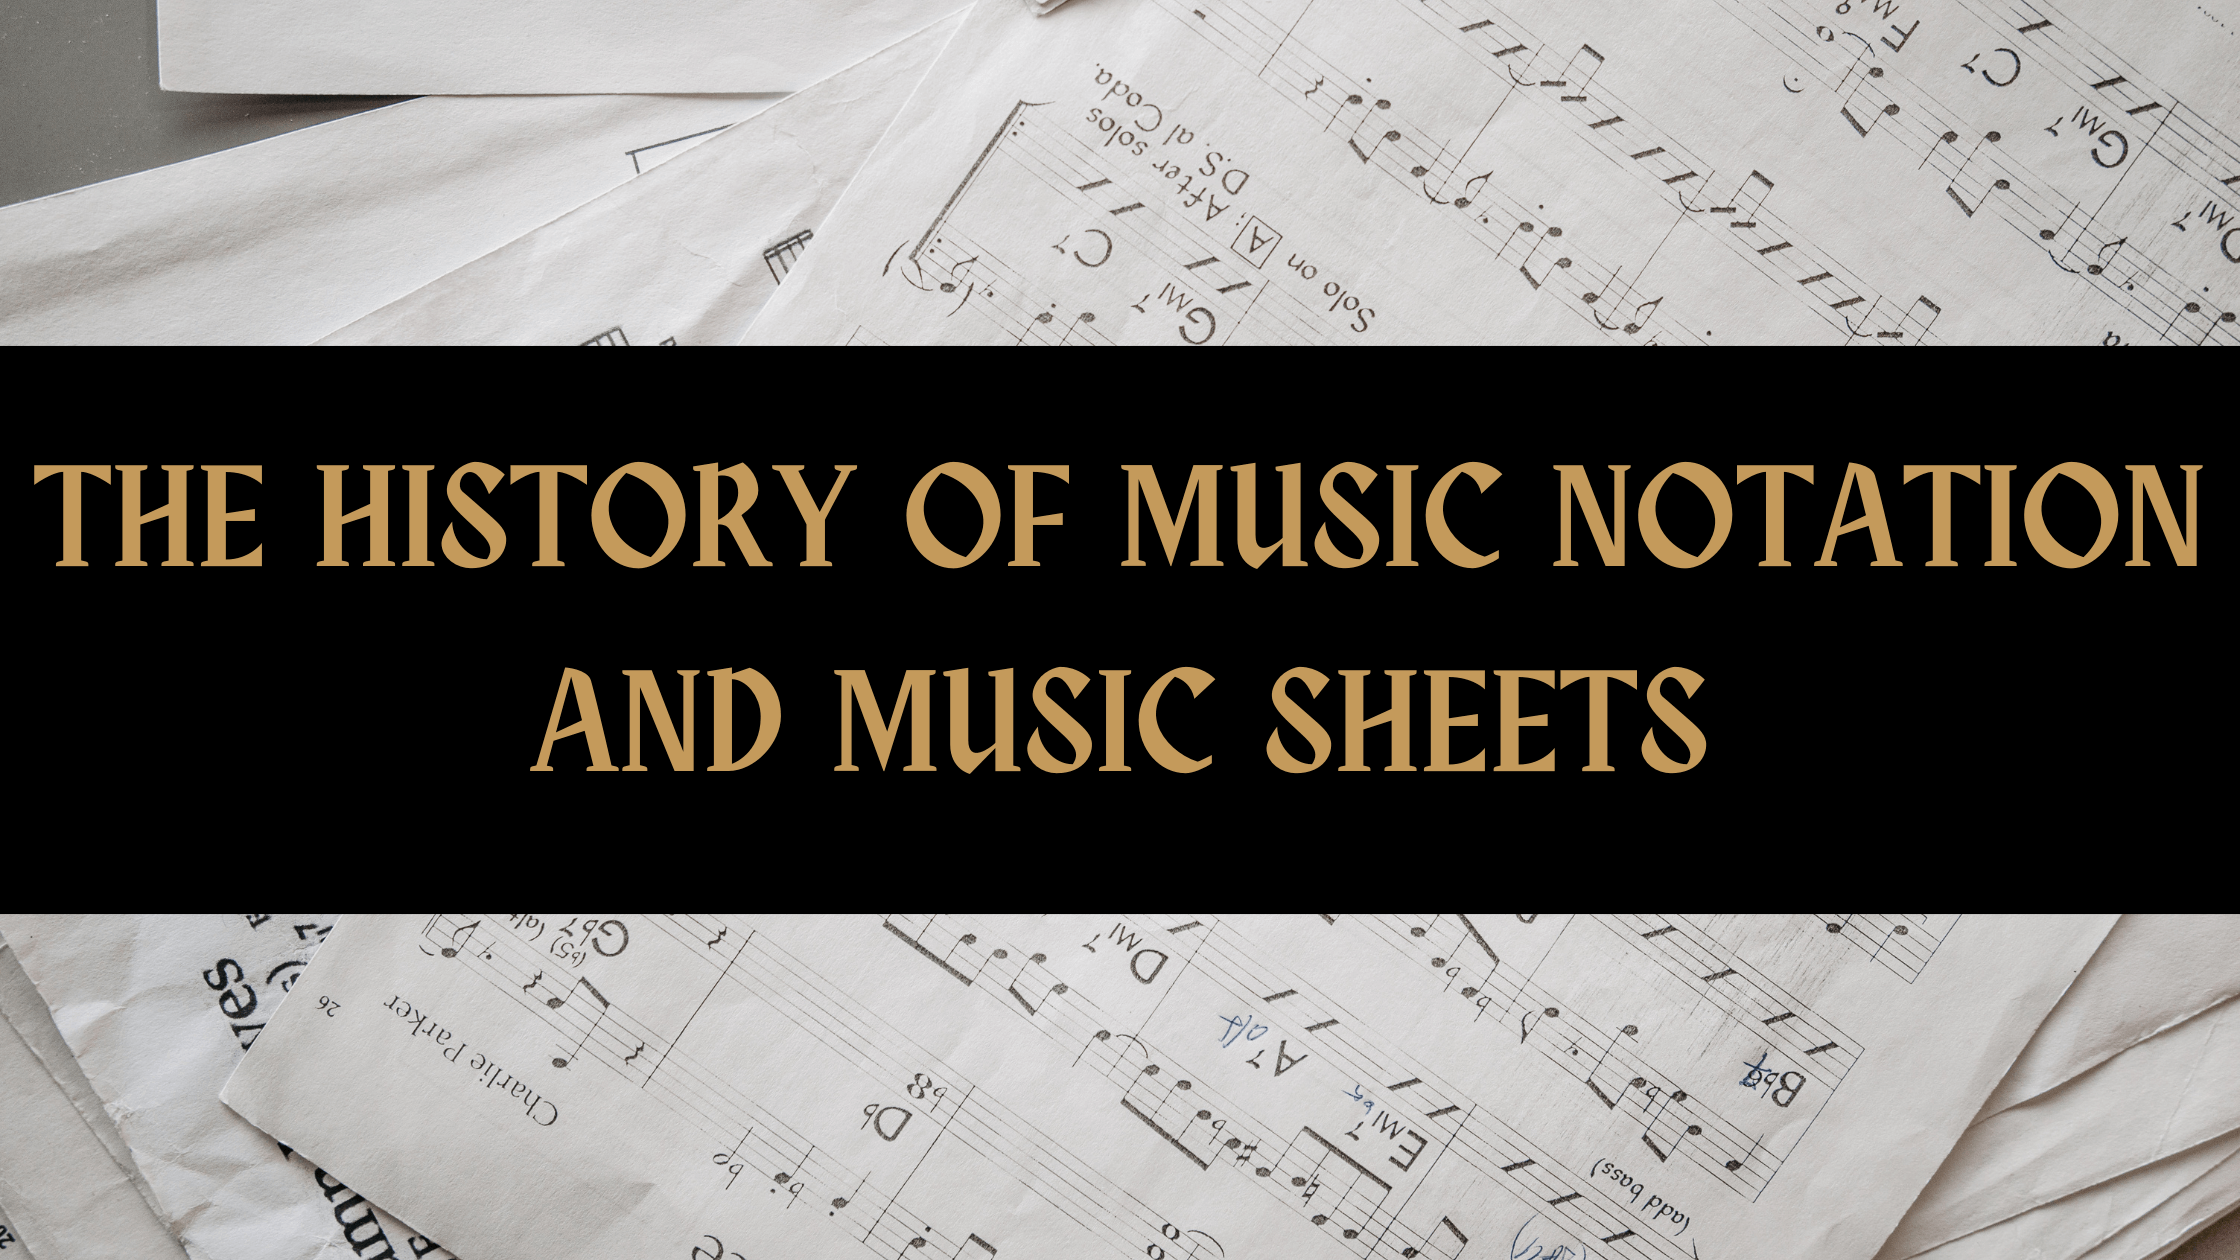 The Music Notation history: when did the Music Sheets and Music Scores get invented